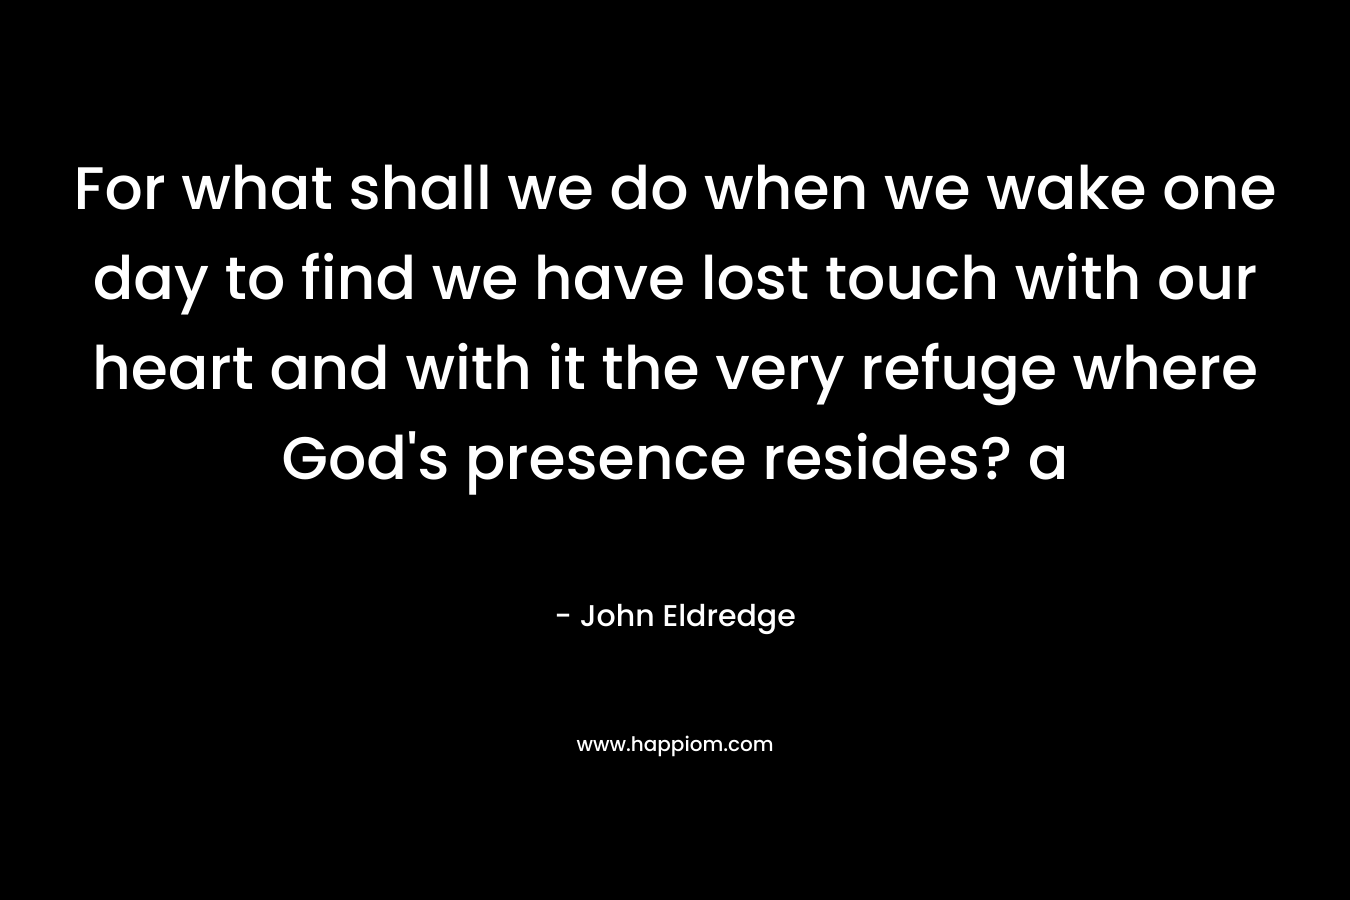 For what shall we do when we wake one day to find we have lost touch with our heart and with it the very refuge where God’s presence resides? a – John Eldredge